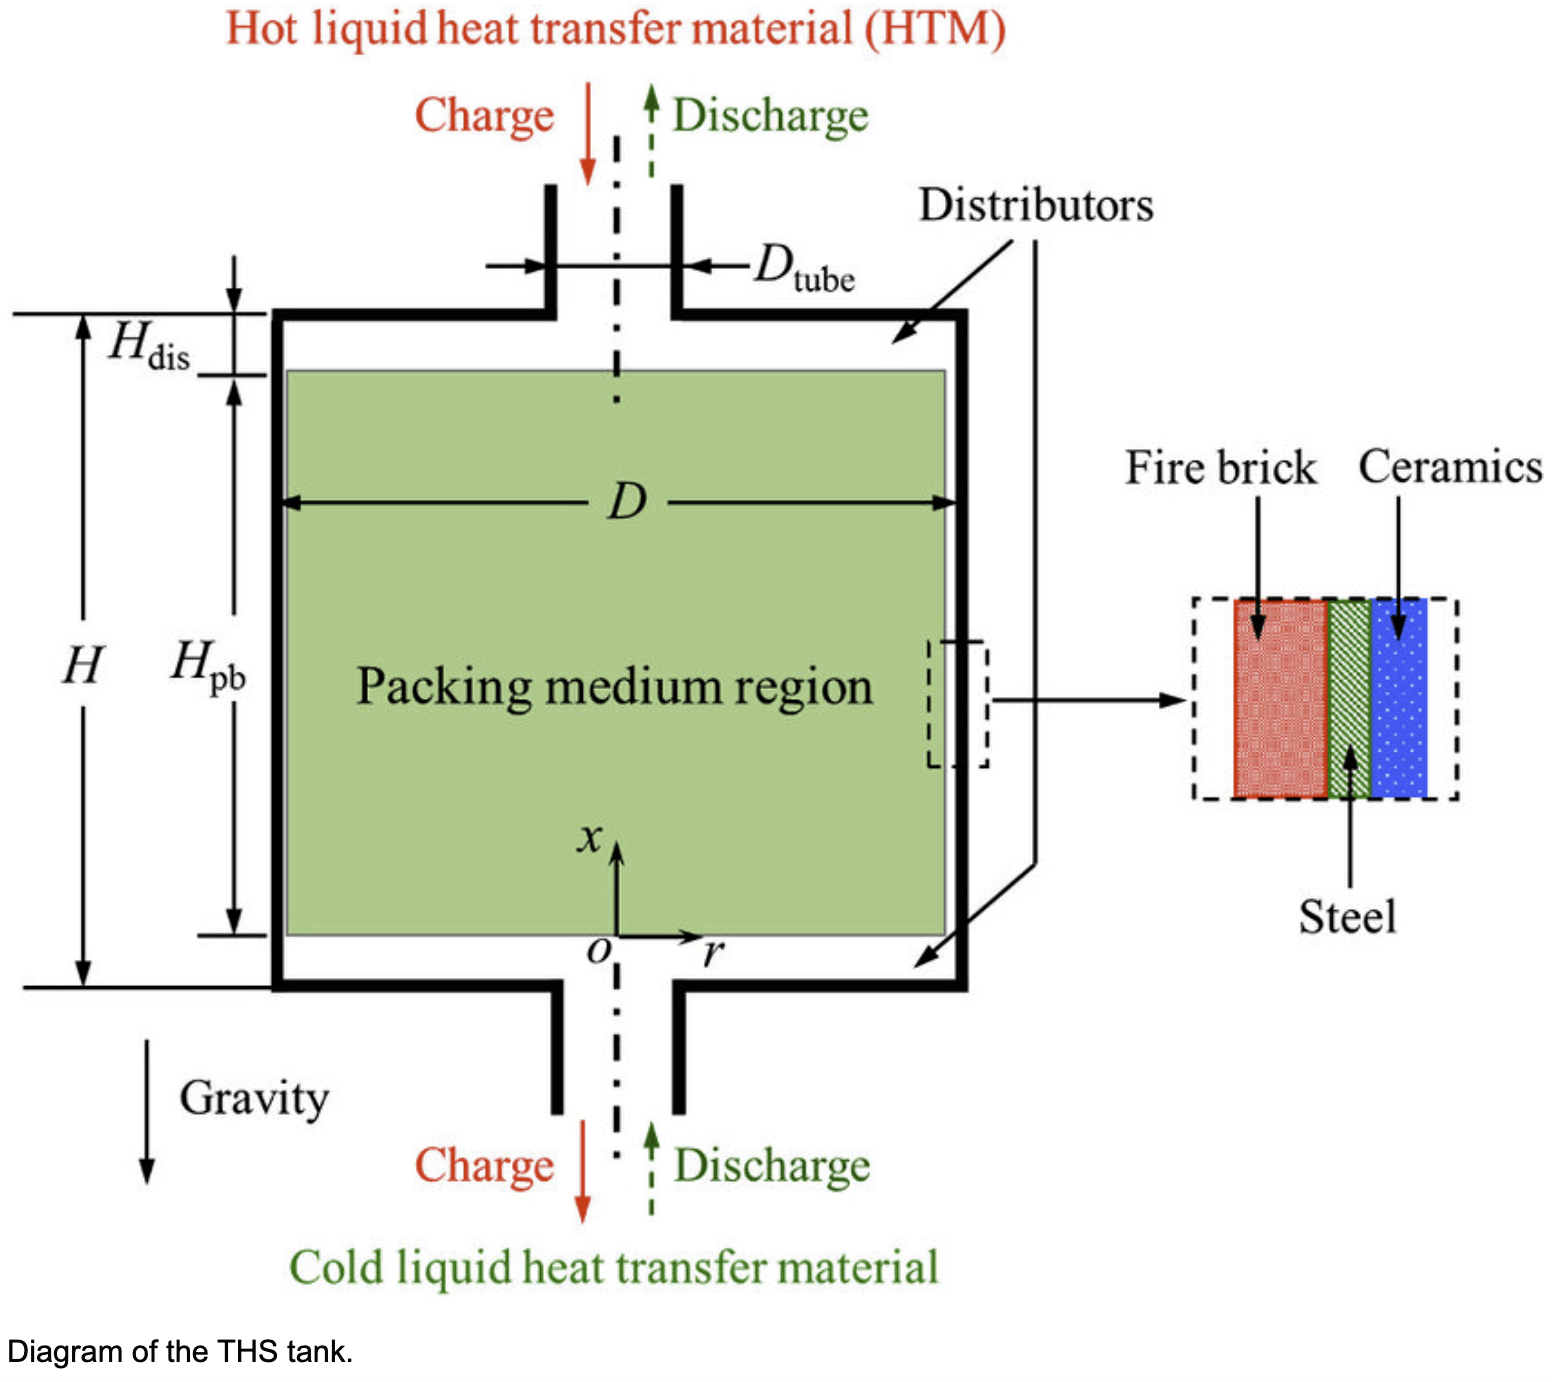 Published in Case Studies in Thermal Engineering – Comparison study of thermoclinic heat storage tanks using different liquid metals for concentrated solar power